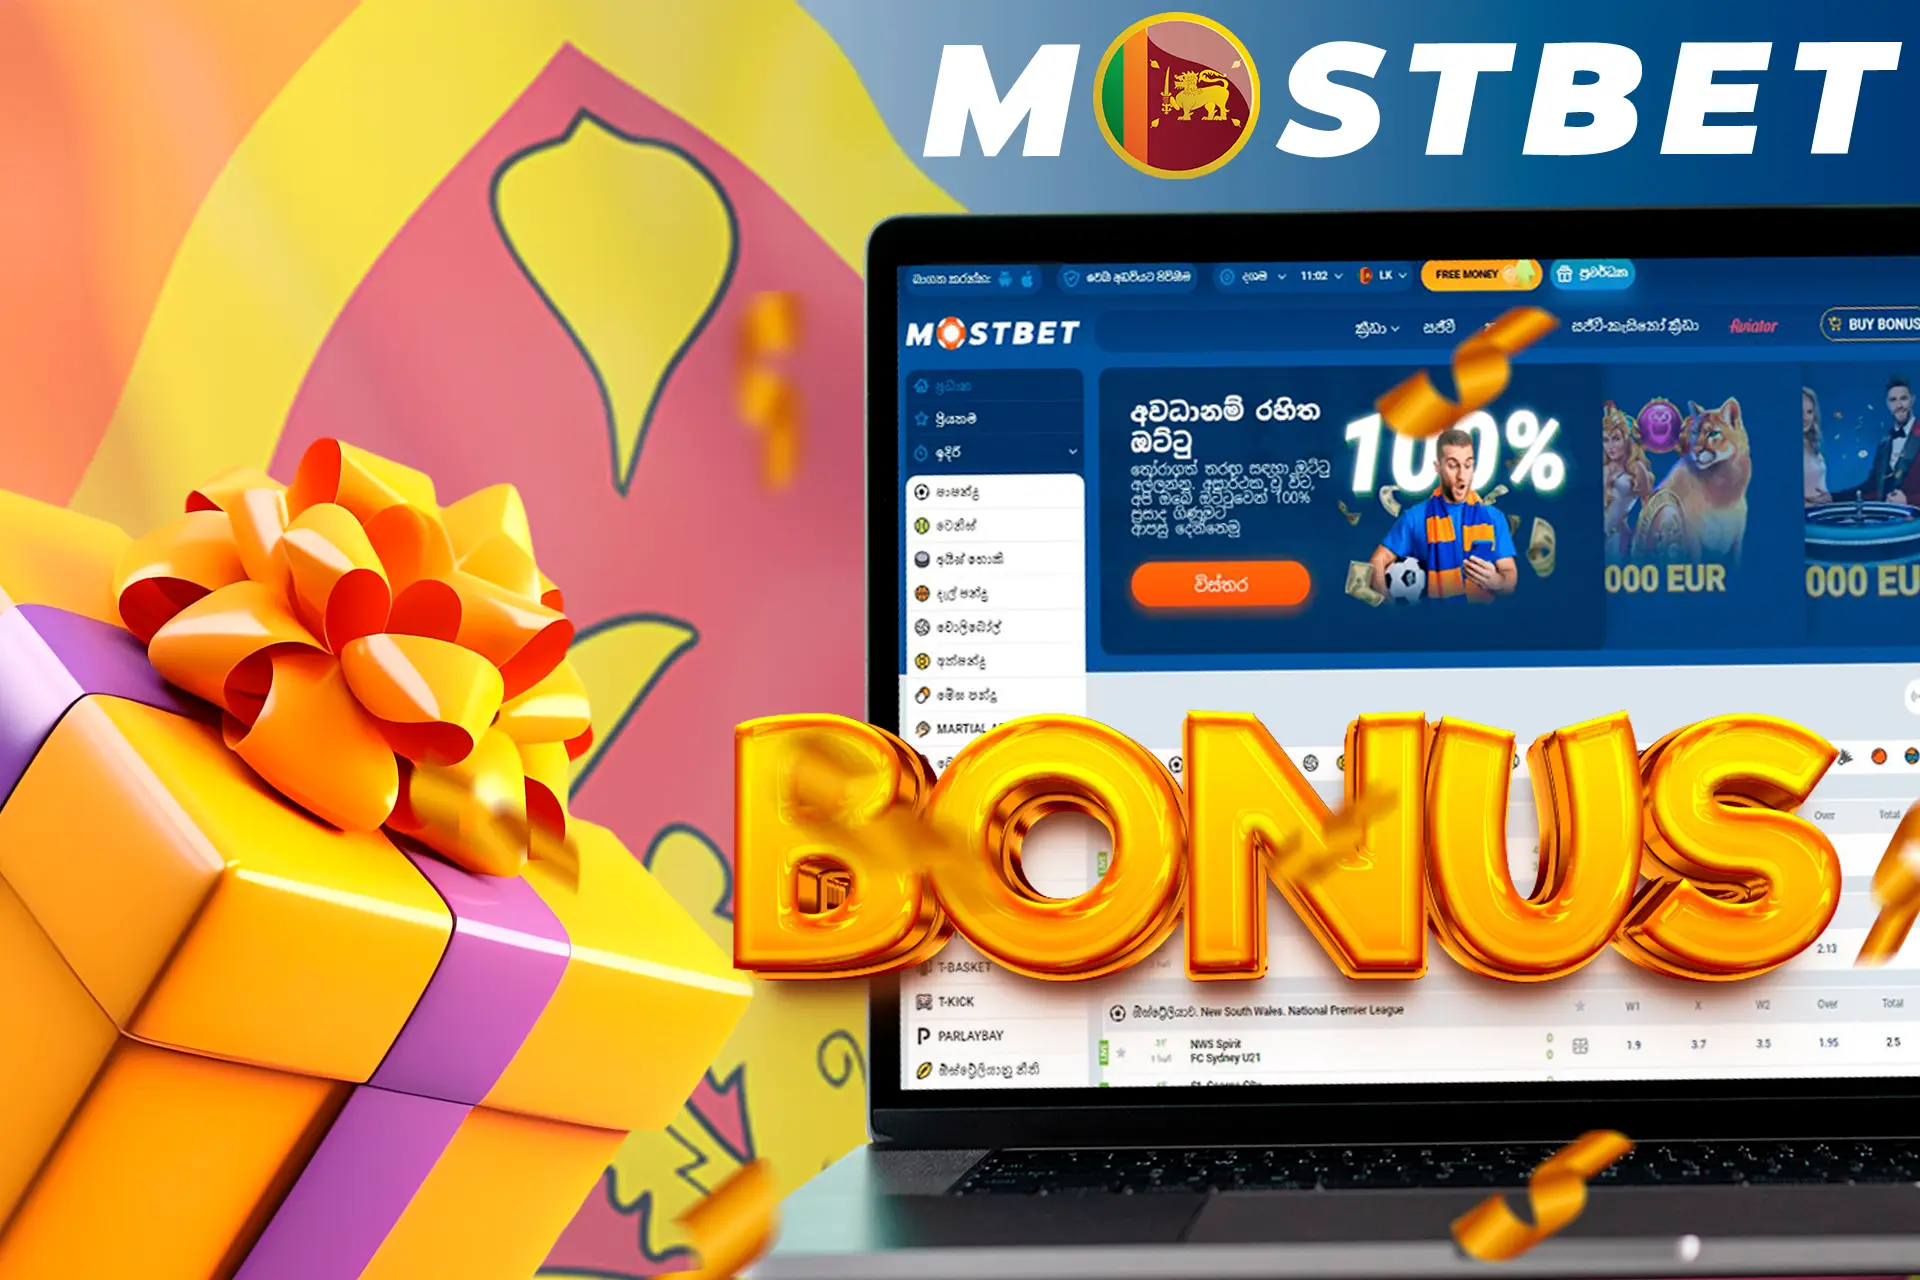 Lots of bonuses are waiting for you at Mostbet Sri Lanka